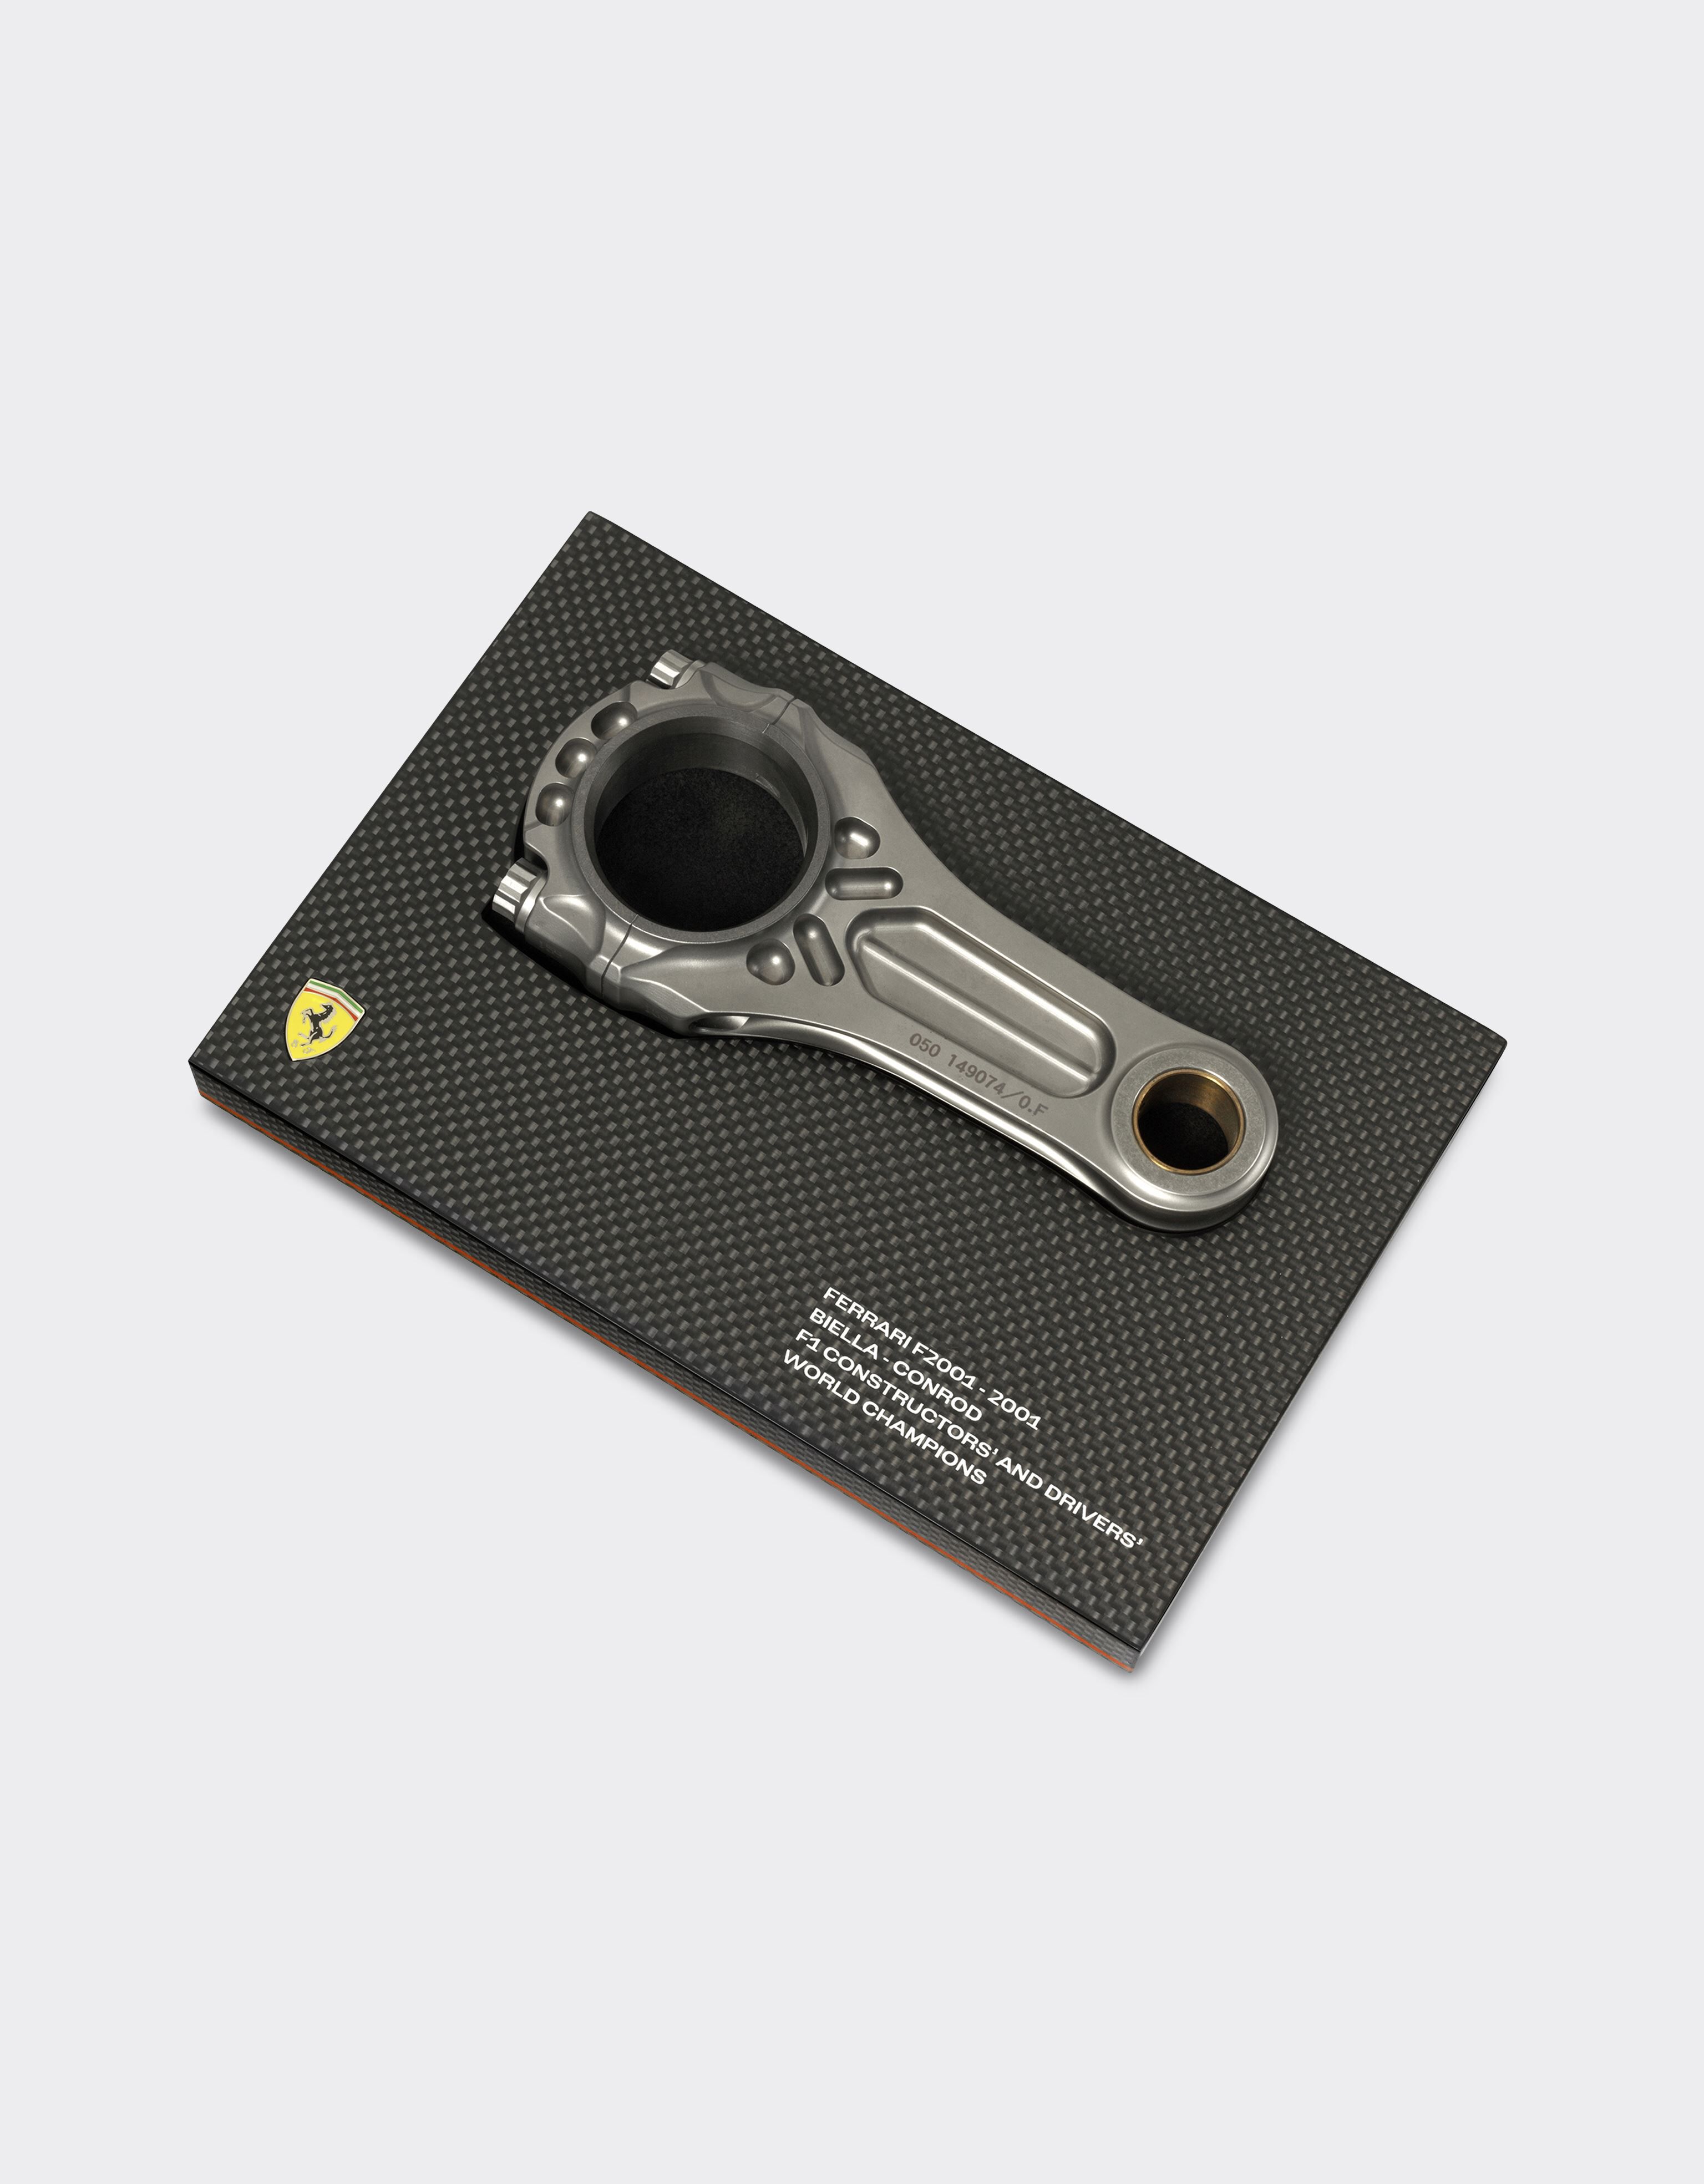 Ferrari Original connecting rod from the F2001, winner of the 2001 Constructors' and Drivers' Championships MULTICOLOUR F1067f